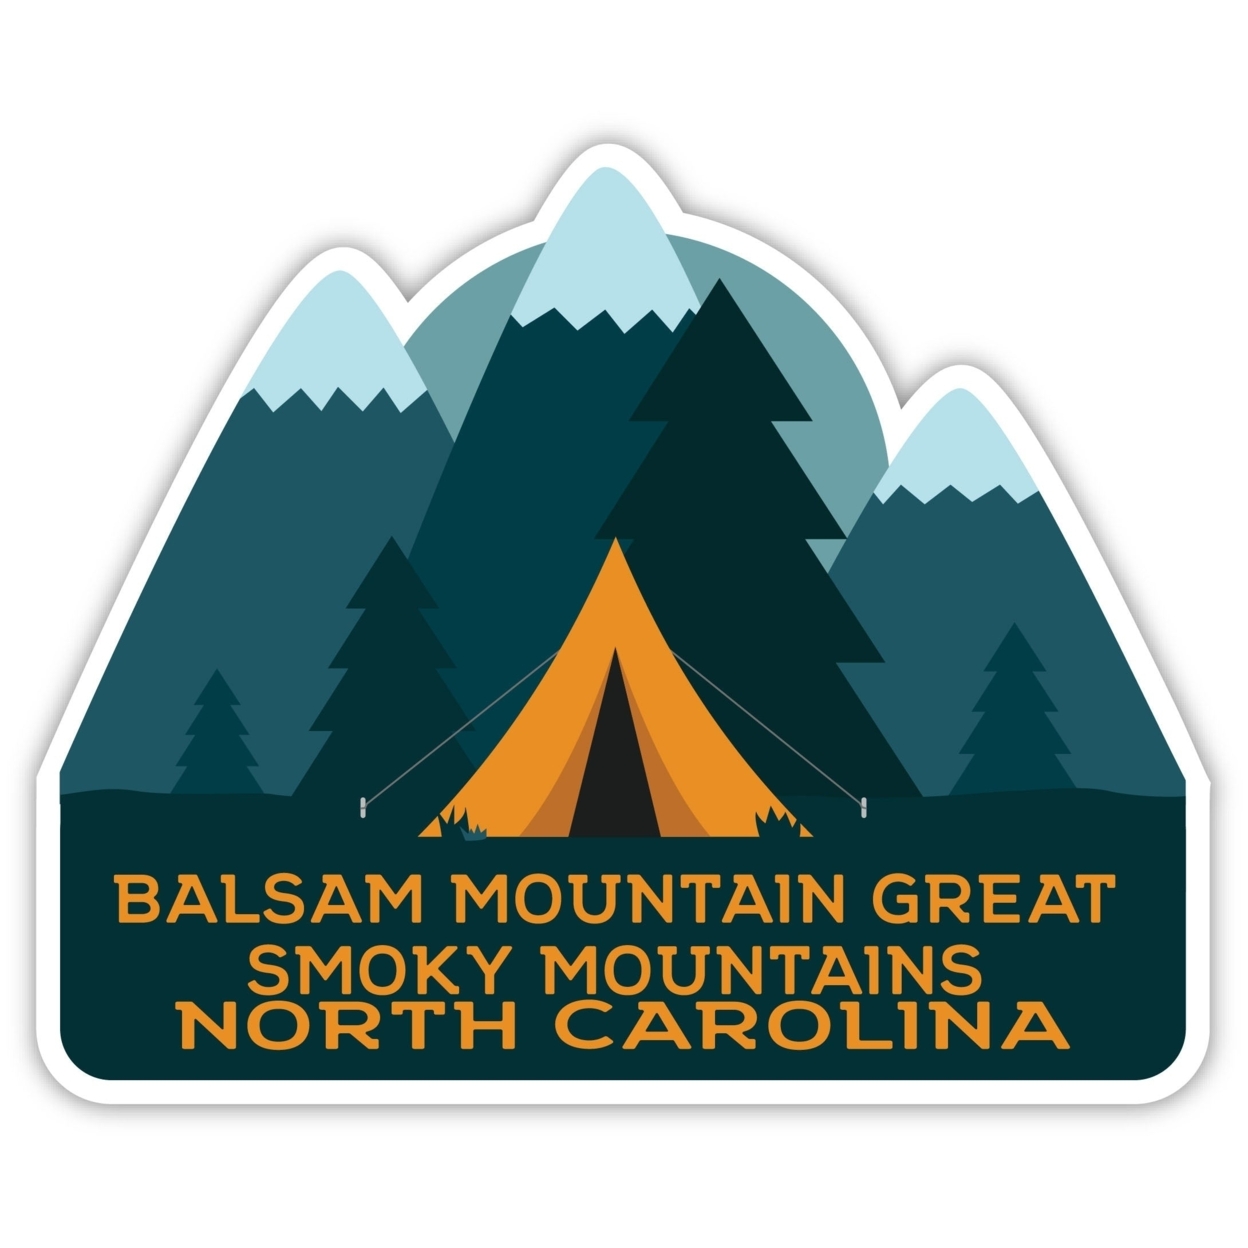 Balsam Mountain Great Smoky Mountains North Carolina Souvenir Decorative Stickers (Choose Theme And Size) - 4-Pack, 6-Inch, Tent